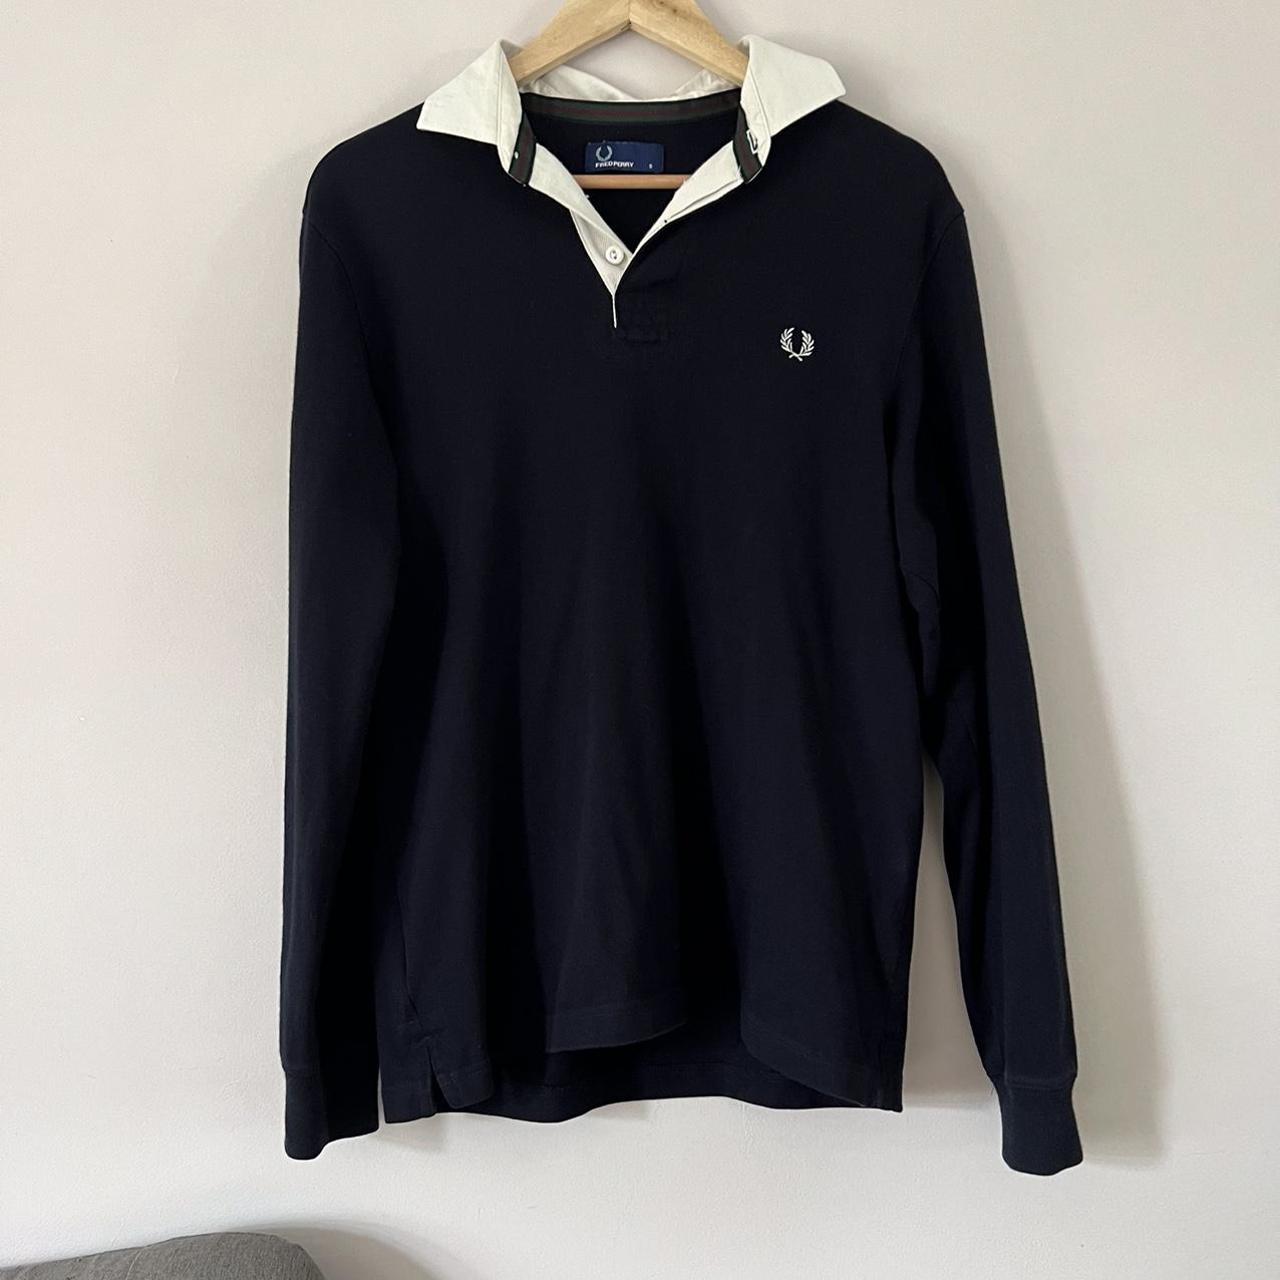 Vintage Fred Perry Rugby Shirt Style Depop 